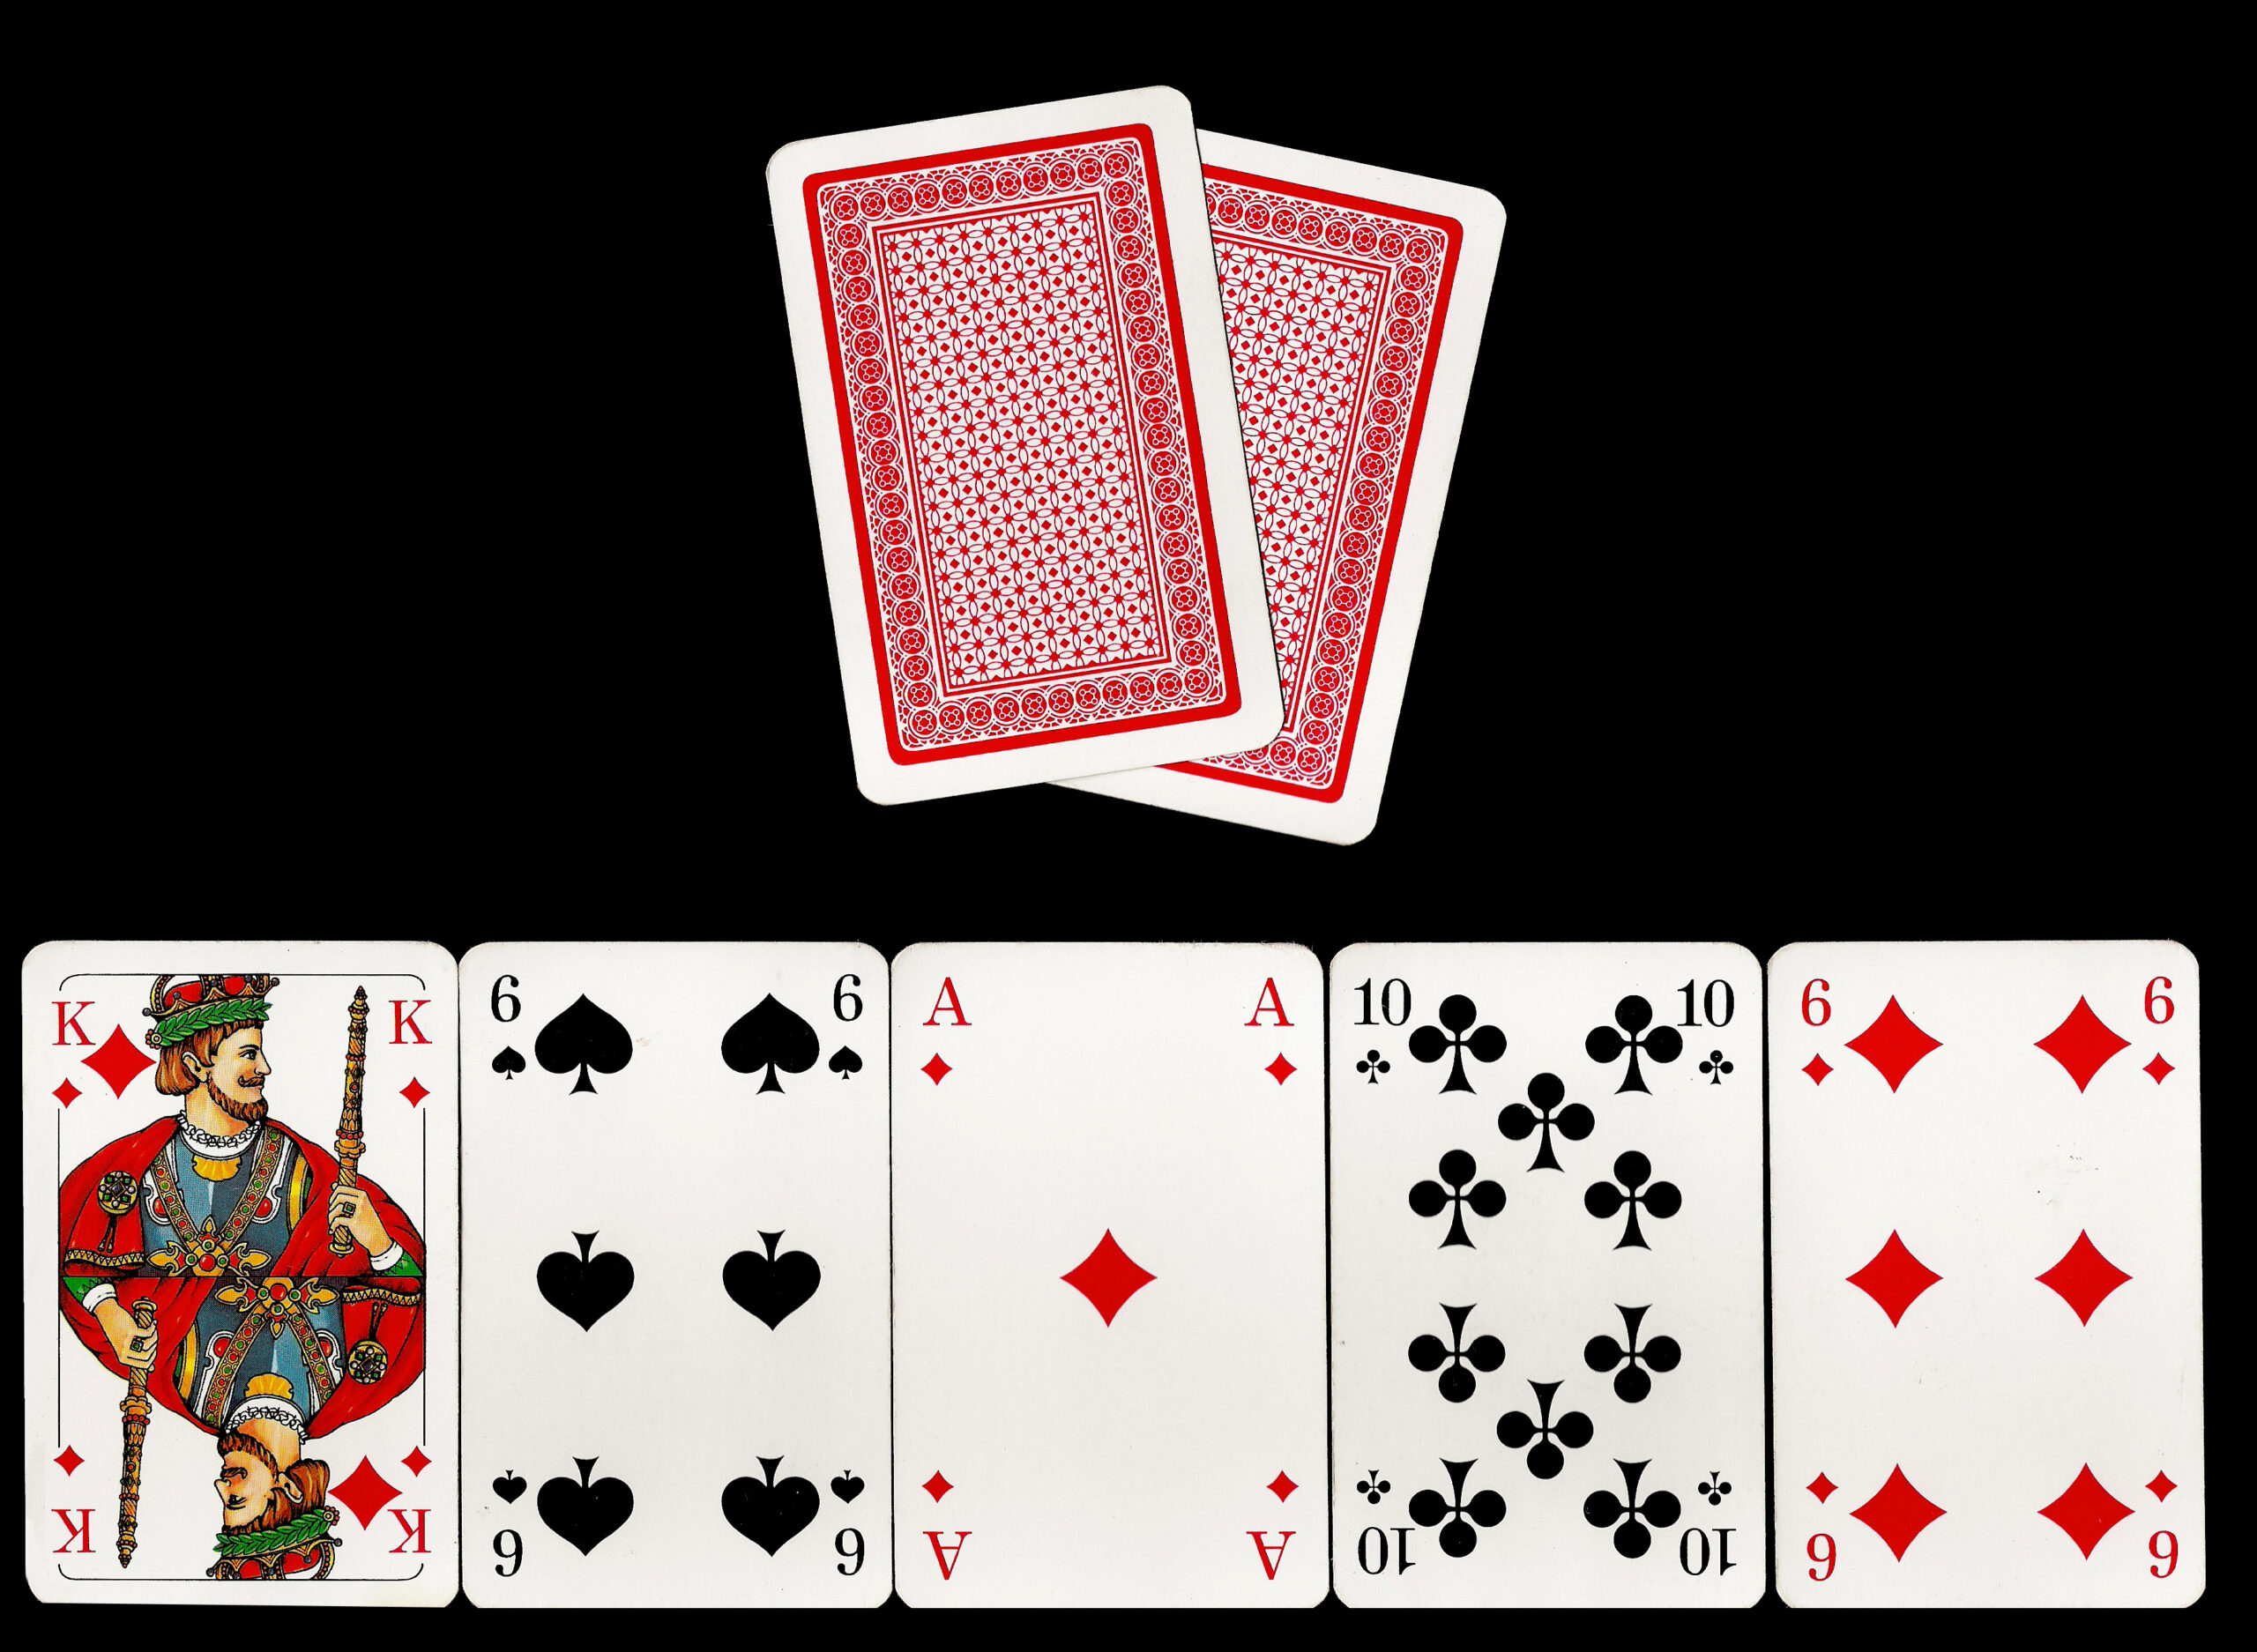 The Art of Bluffing: Psychological Tactics in Poker and Beyond